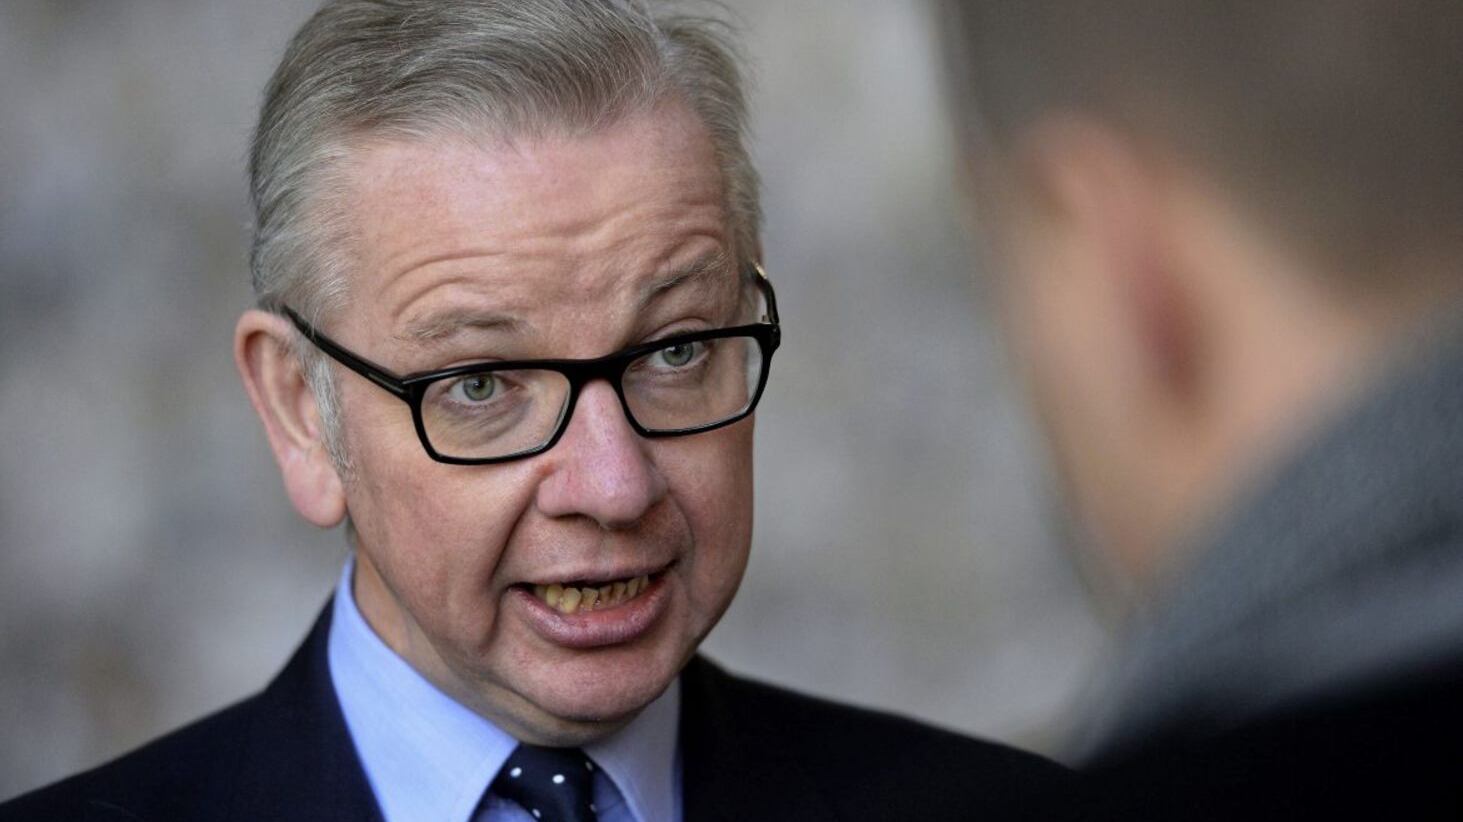 Environment Secretary Michael Gove said dairy farmers in the north were likely to be adversely affected